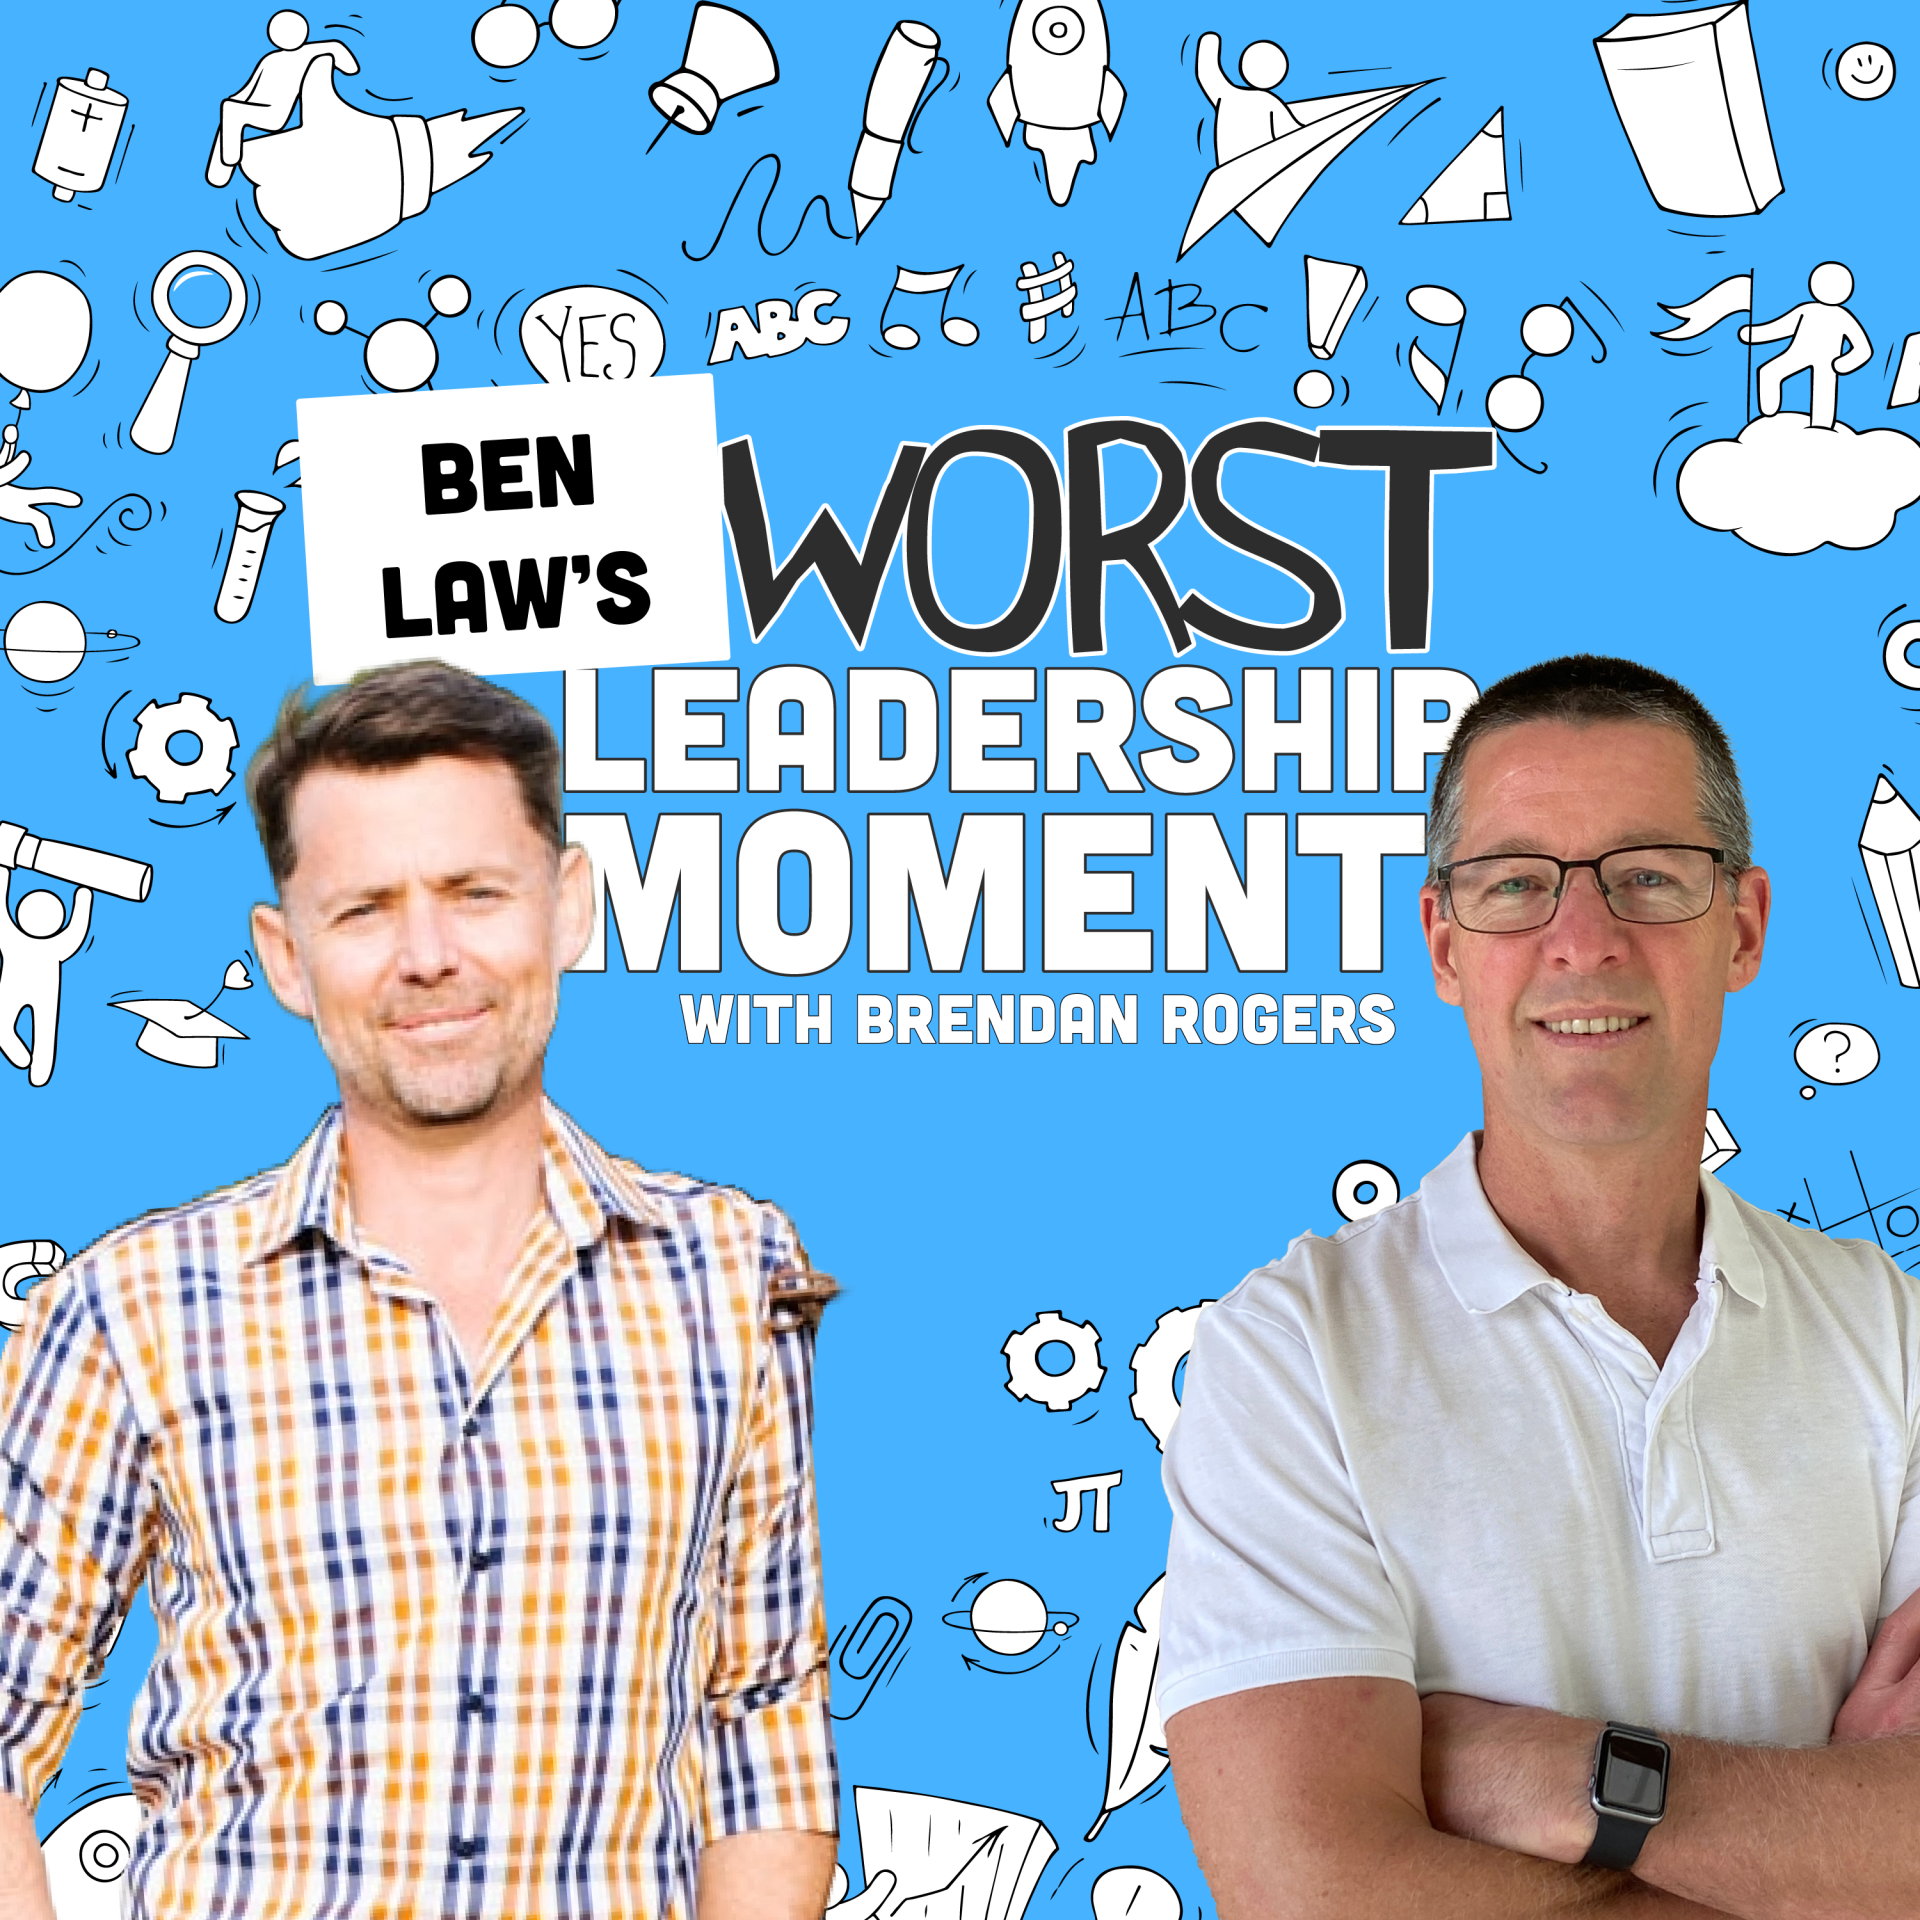 My Worst Leadership Moment with Ben Law (The Financial Bloke)